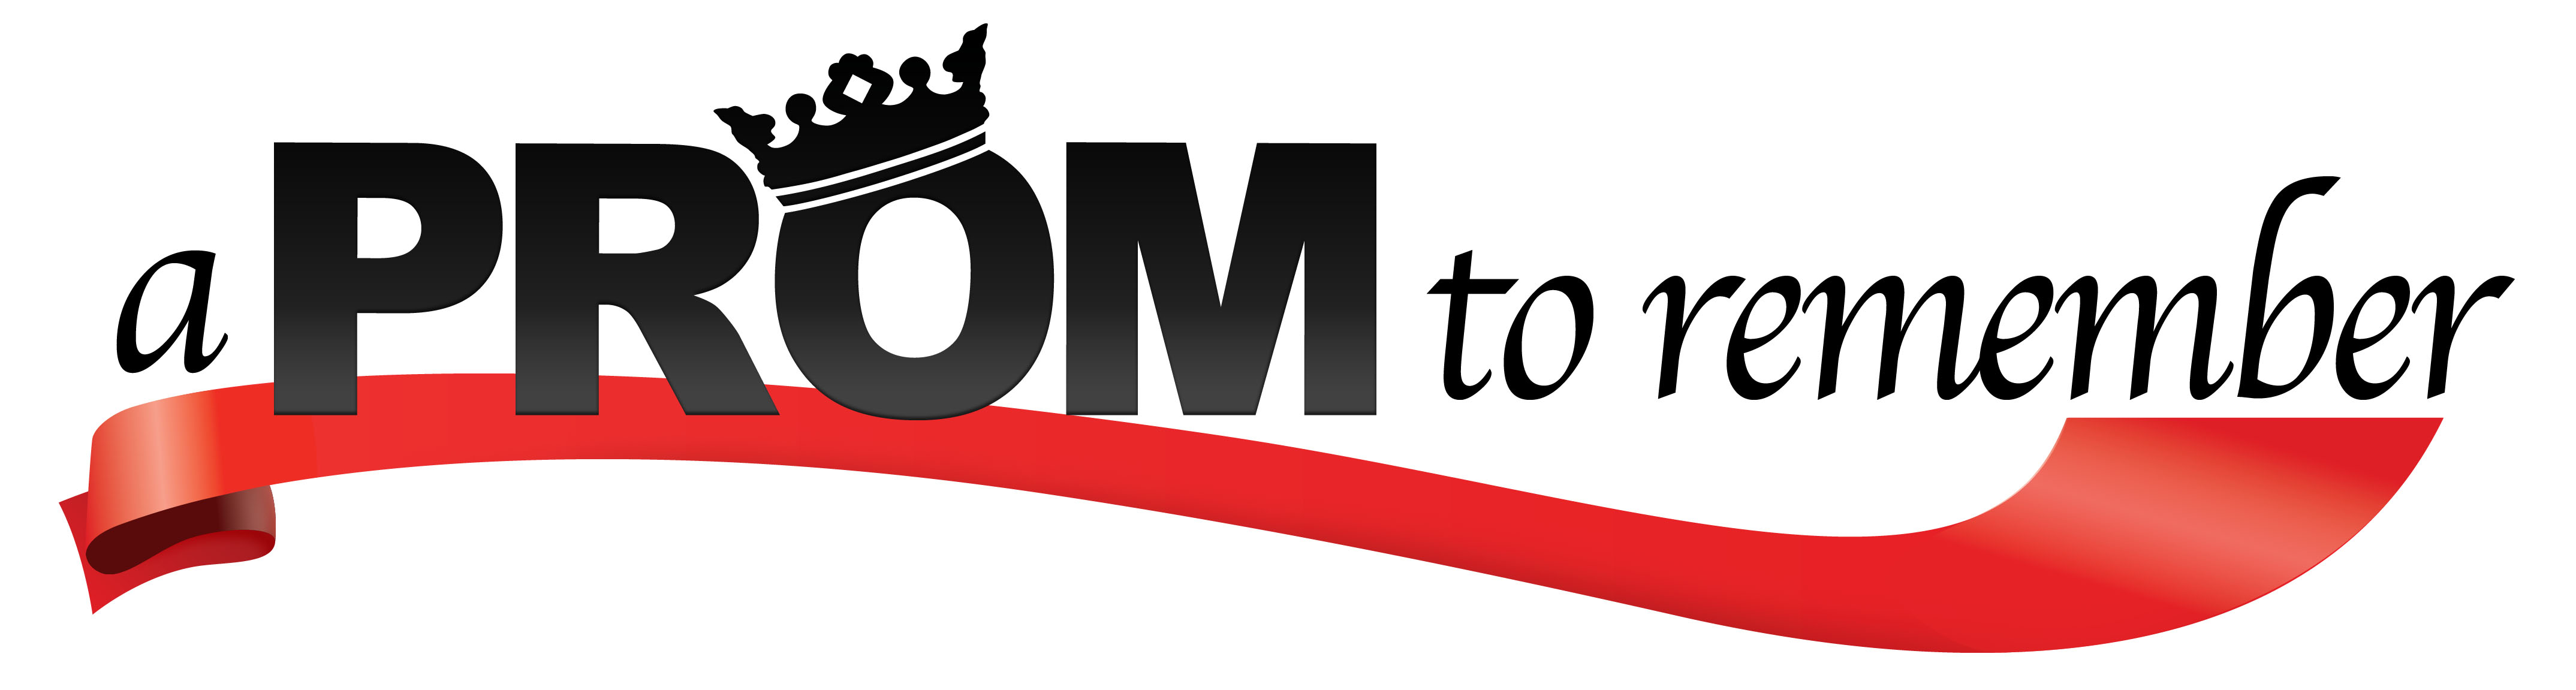 A Prom to Remember logo